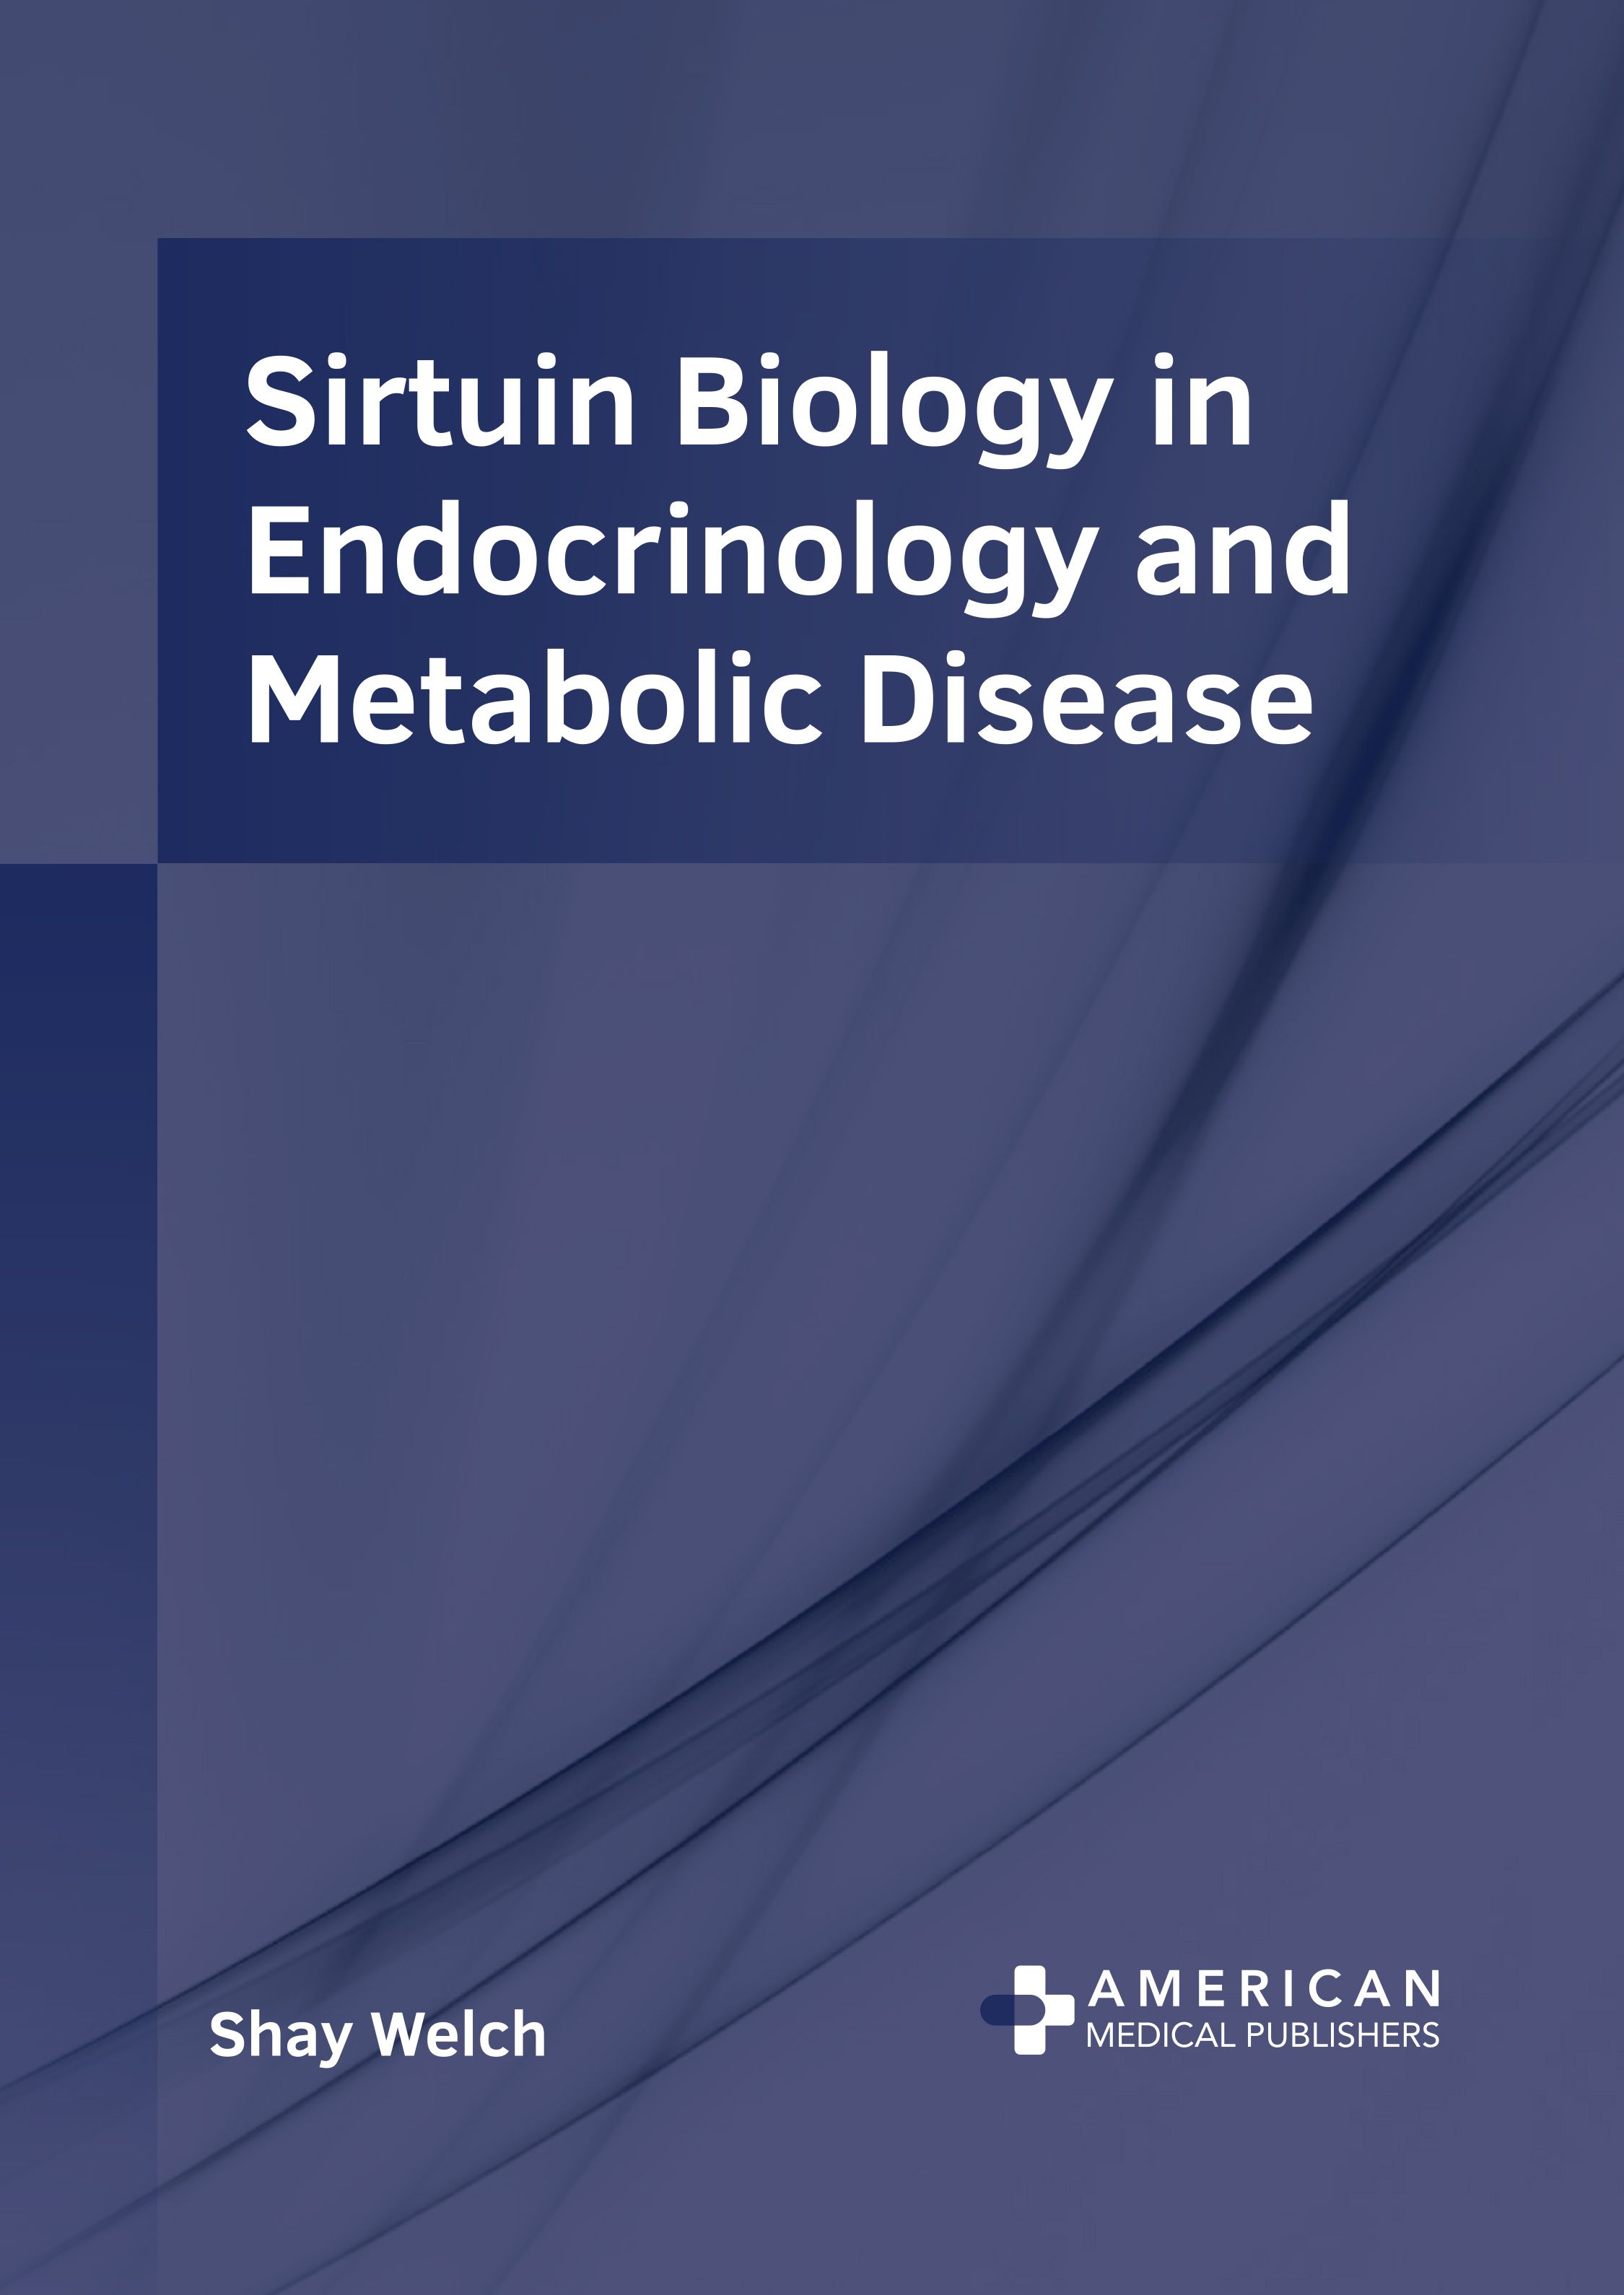 SIRTUIN BIOLOGY IN ENDOCRINOLOGY AND METABOLIC DISEASE